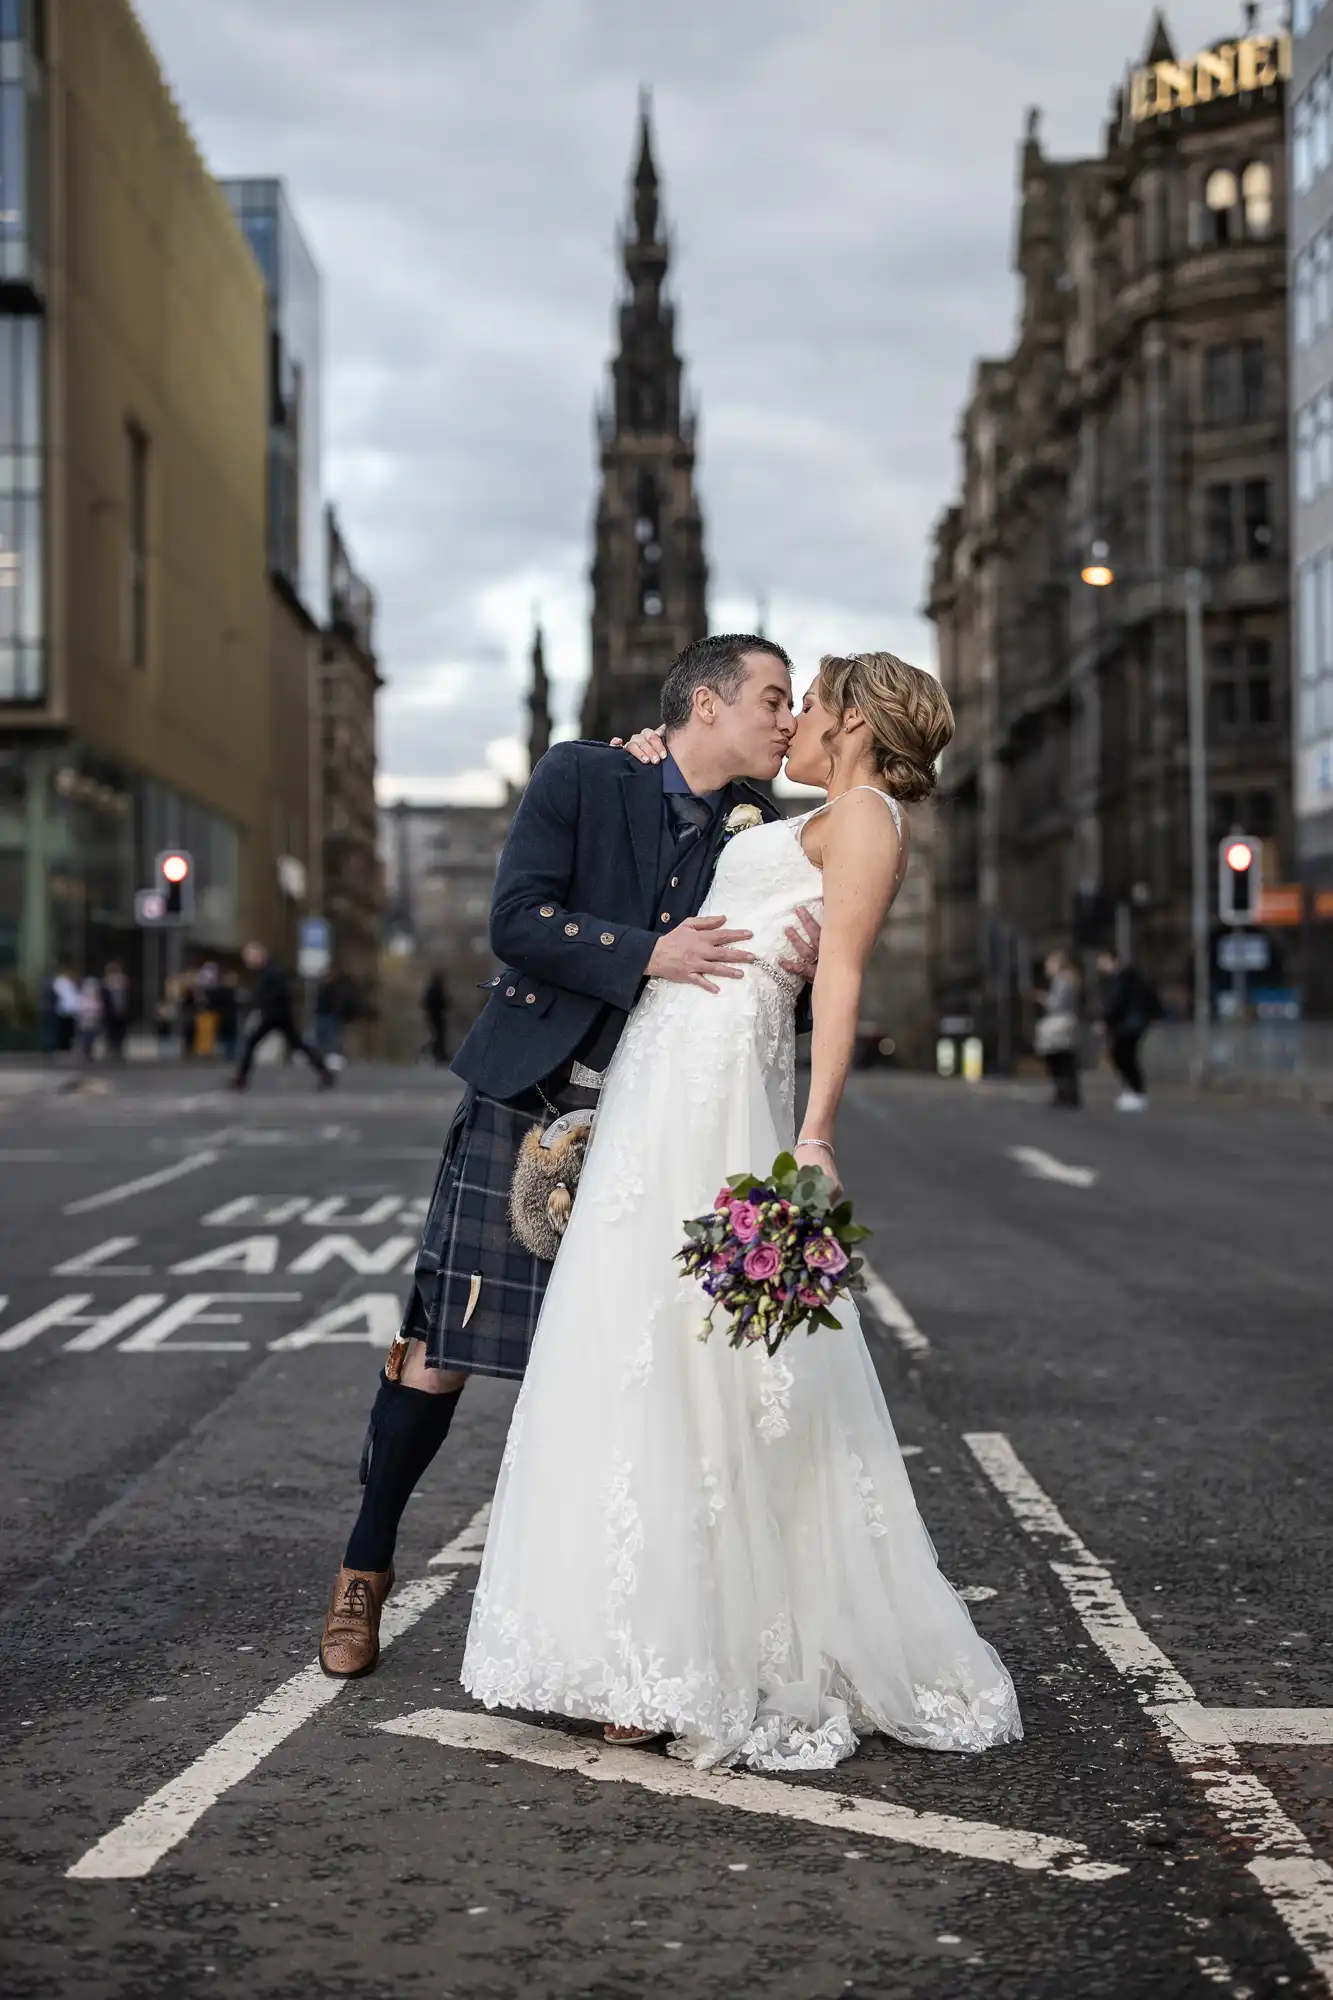 A bride and groom kiss on an urban street, with the bride holding a bouquet and the groom wearing a kilt. A tall monument and historic buildings are visible in the background.